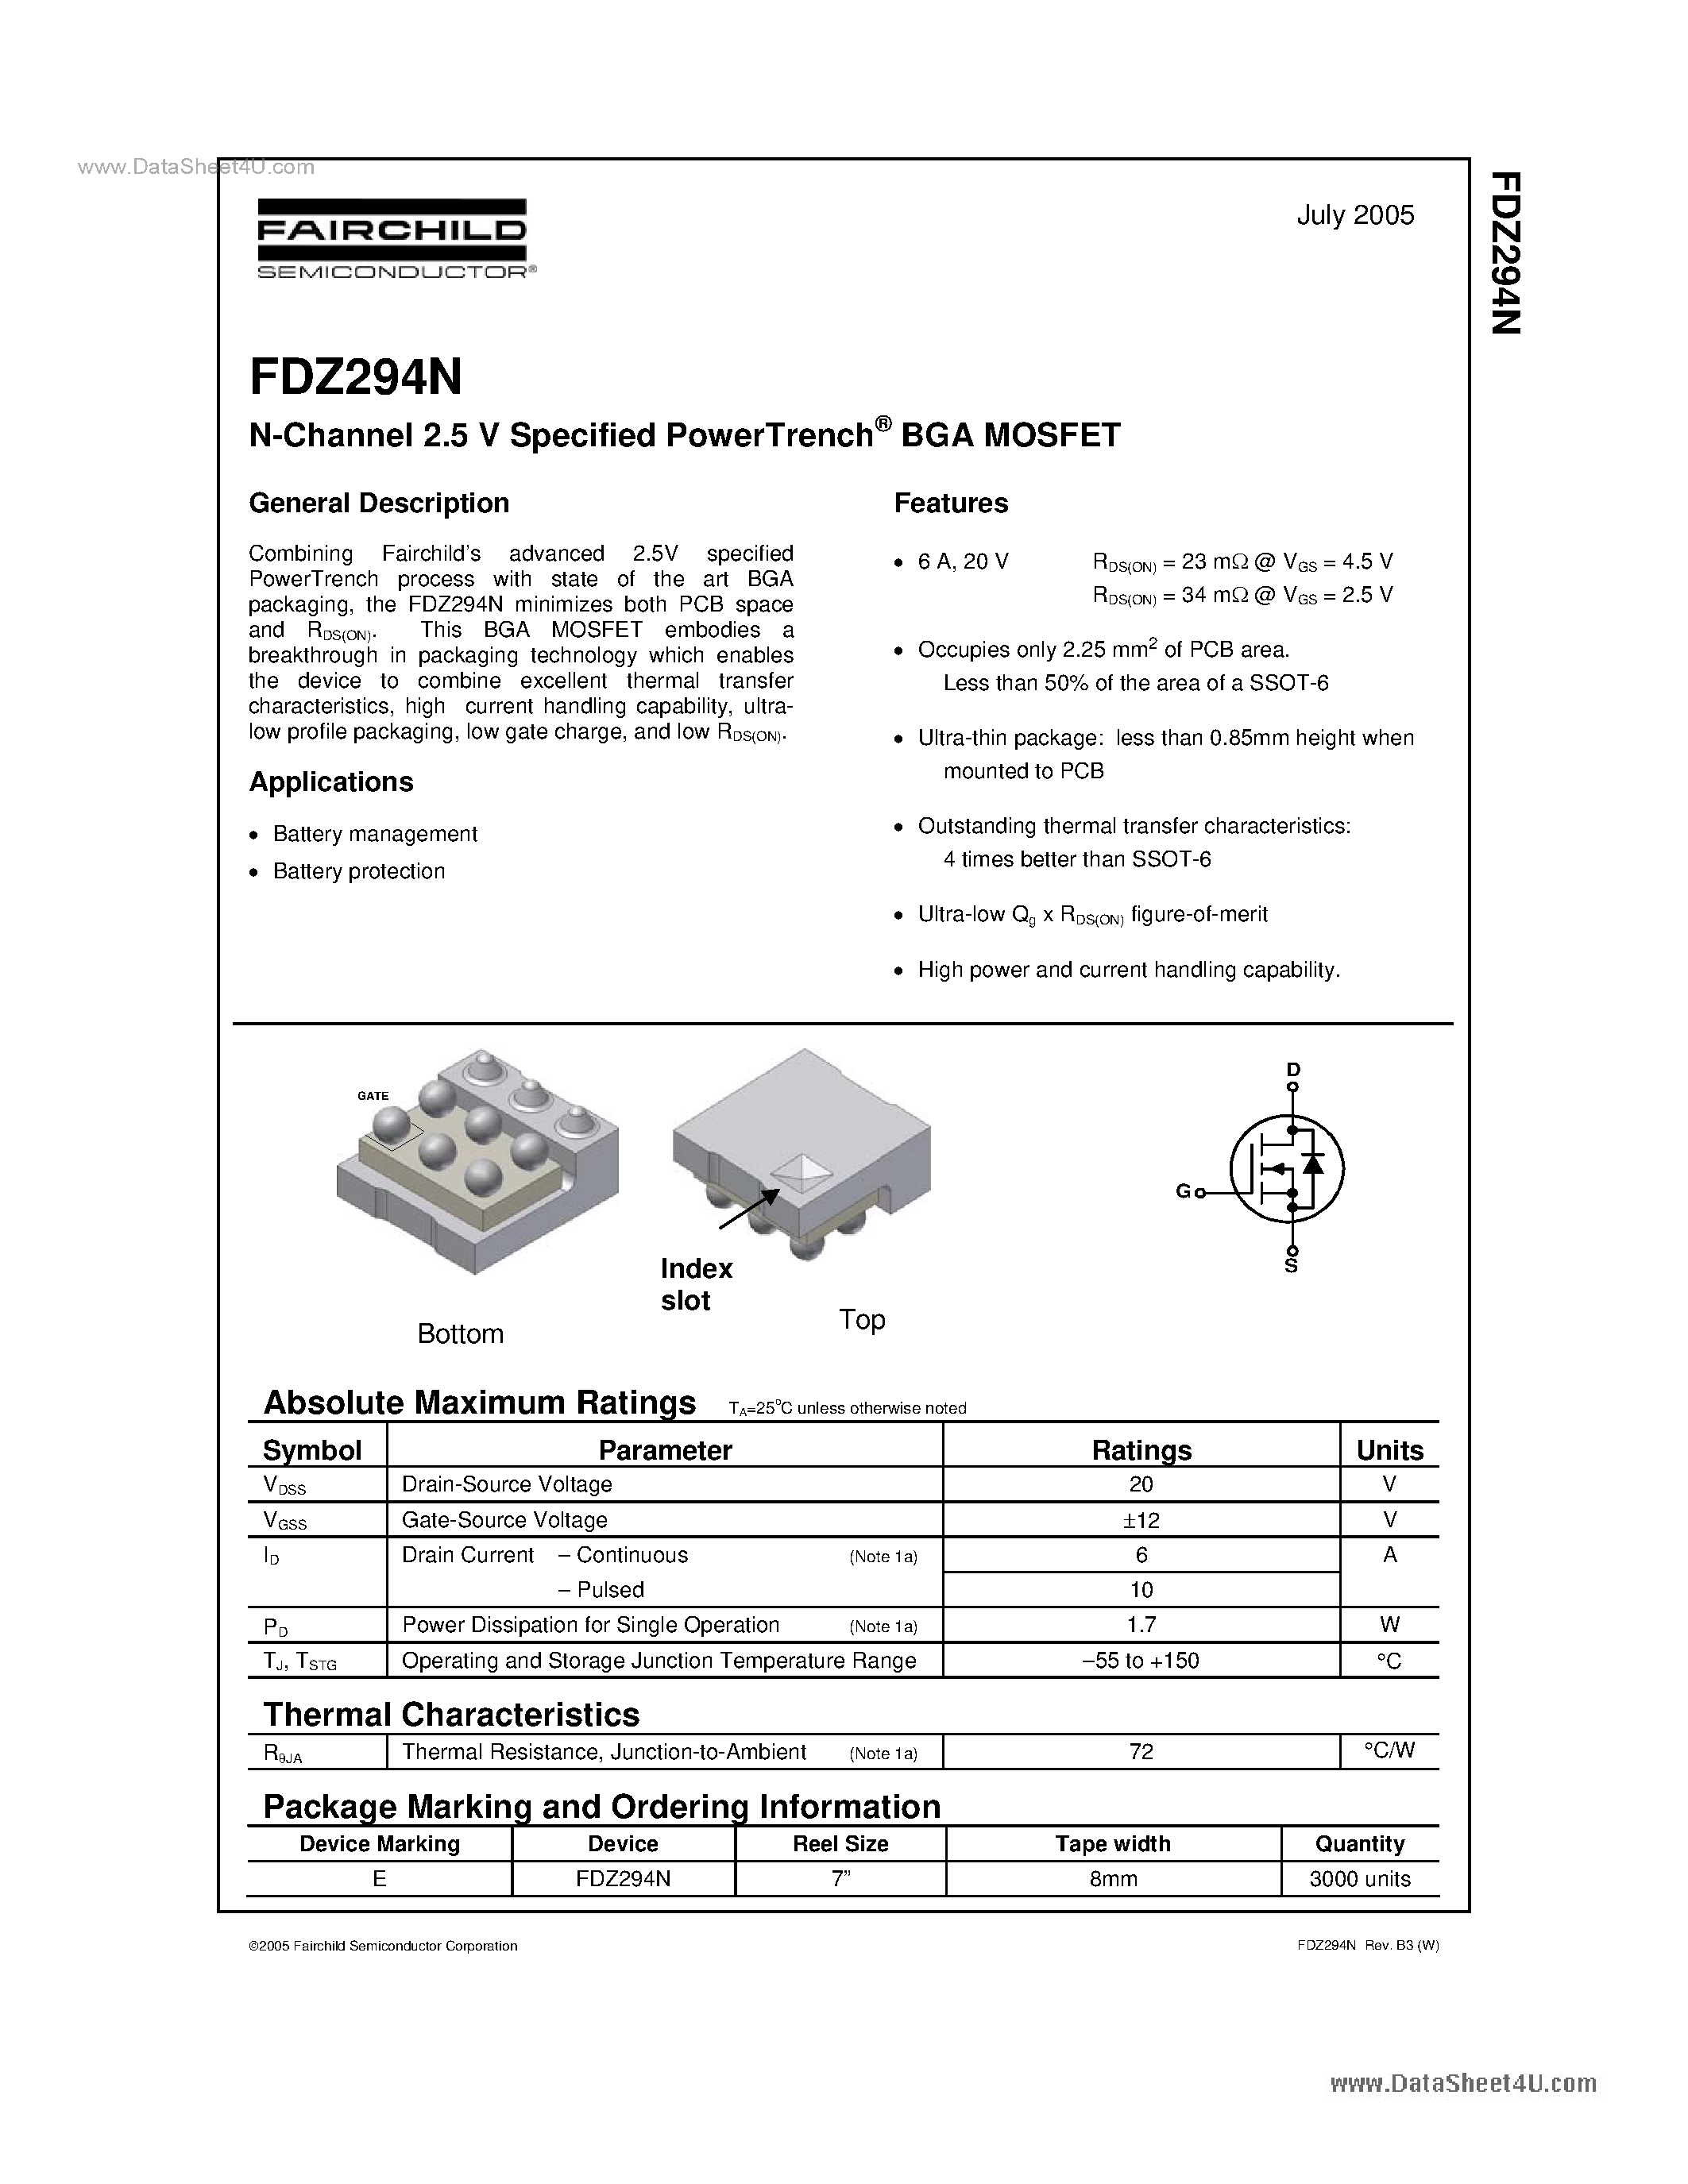 Datasheet FDZ294N - N-Channel 2.5 V Specified PowerTrench BGA MOSFET page 1